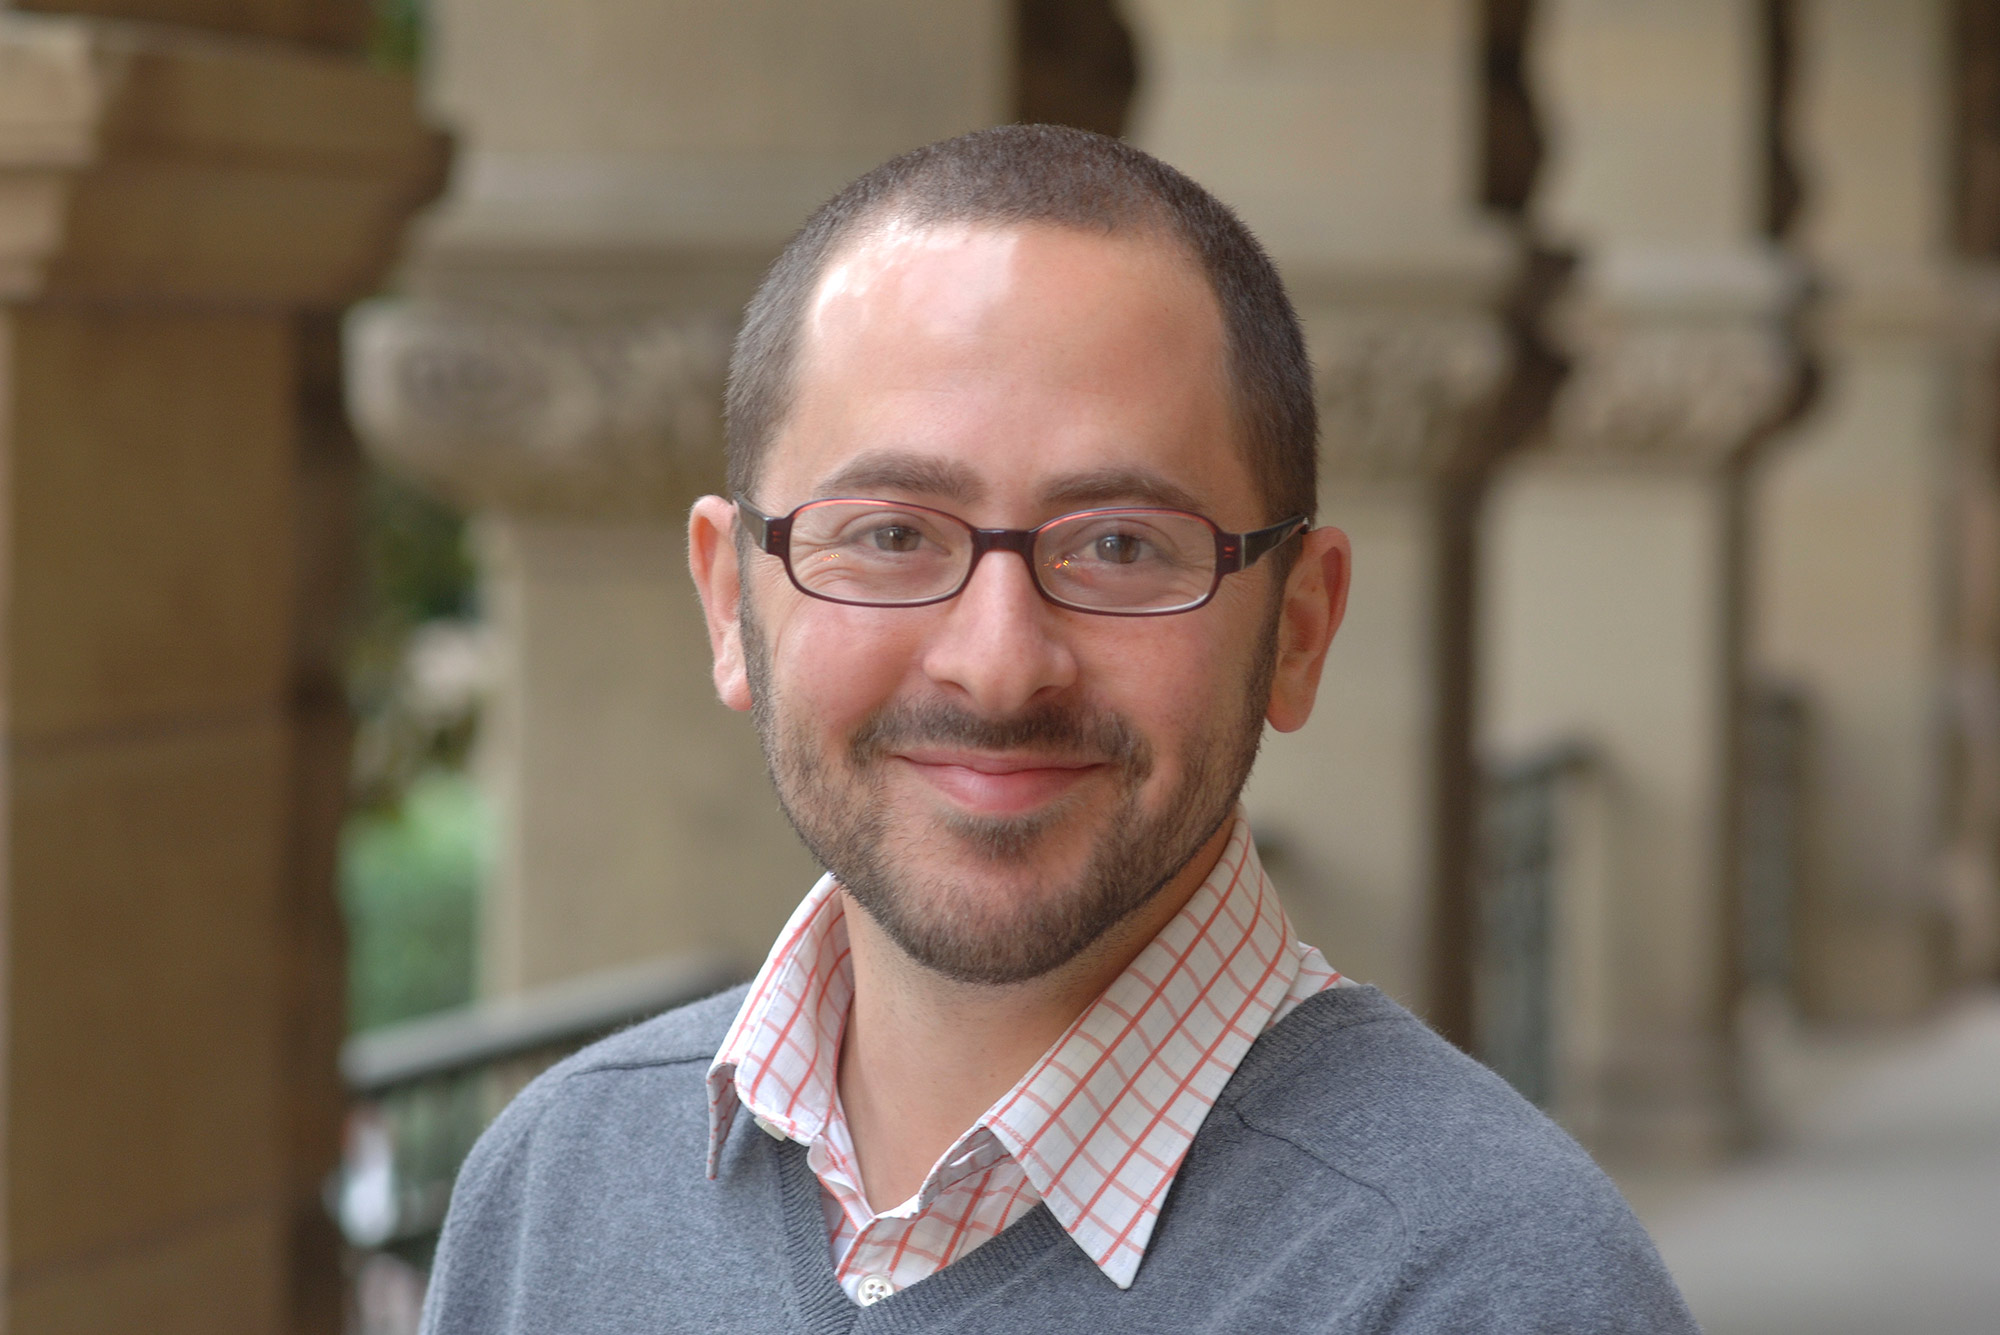 Portrait of The Pardee School of Global Studies’ Jeremy Menchik in a gray sweater with blurred columns in the background.